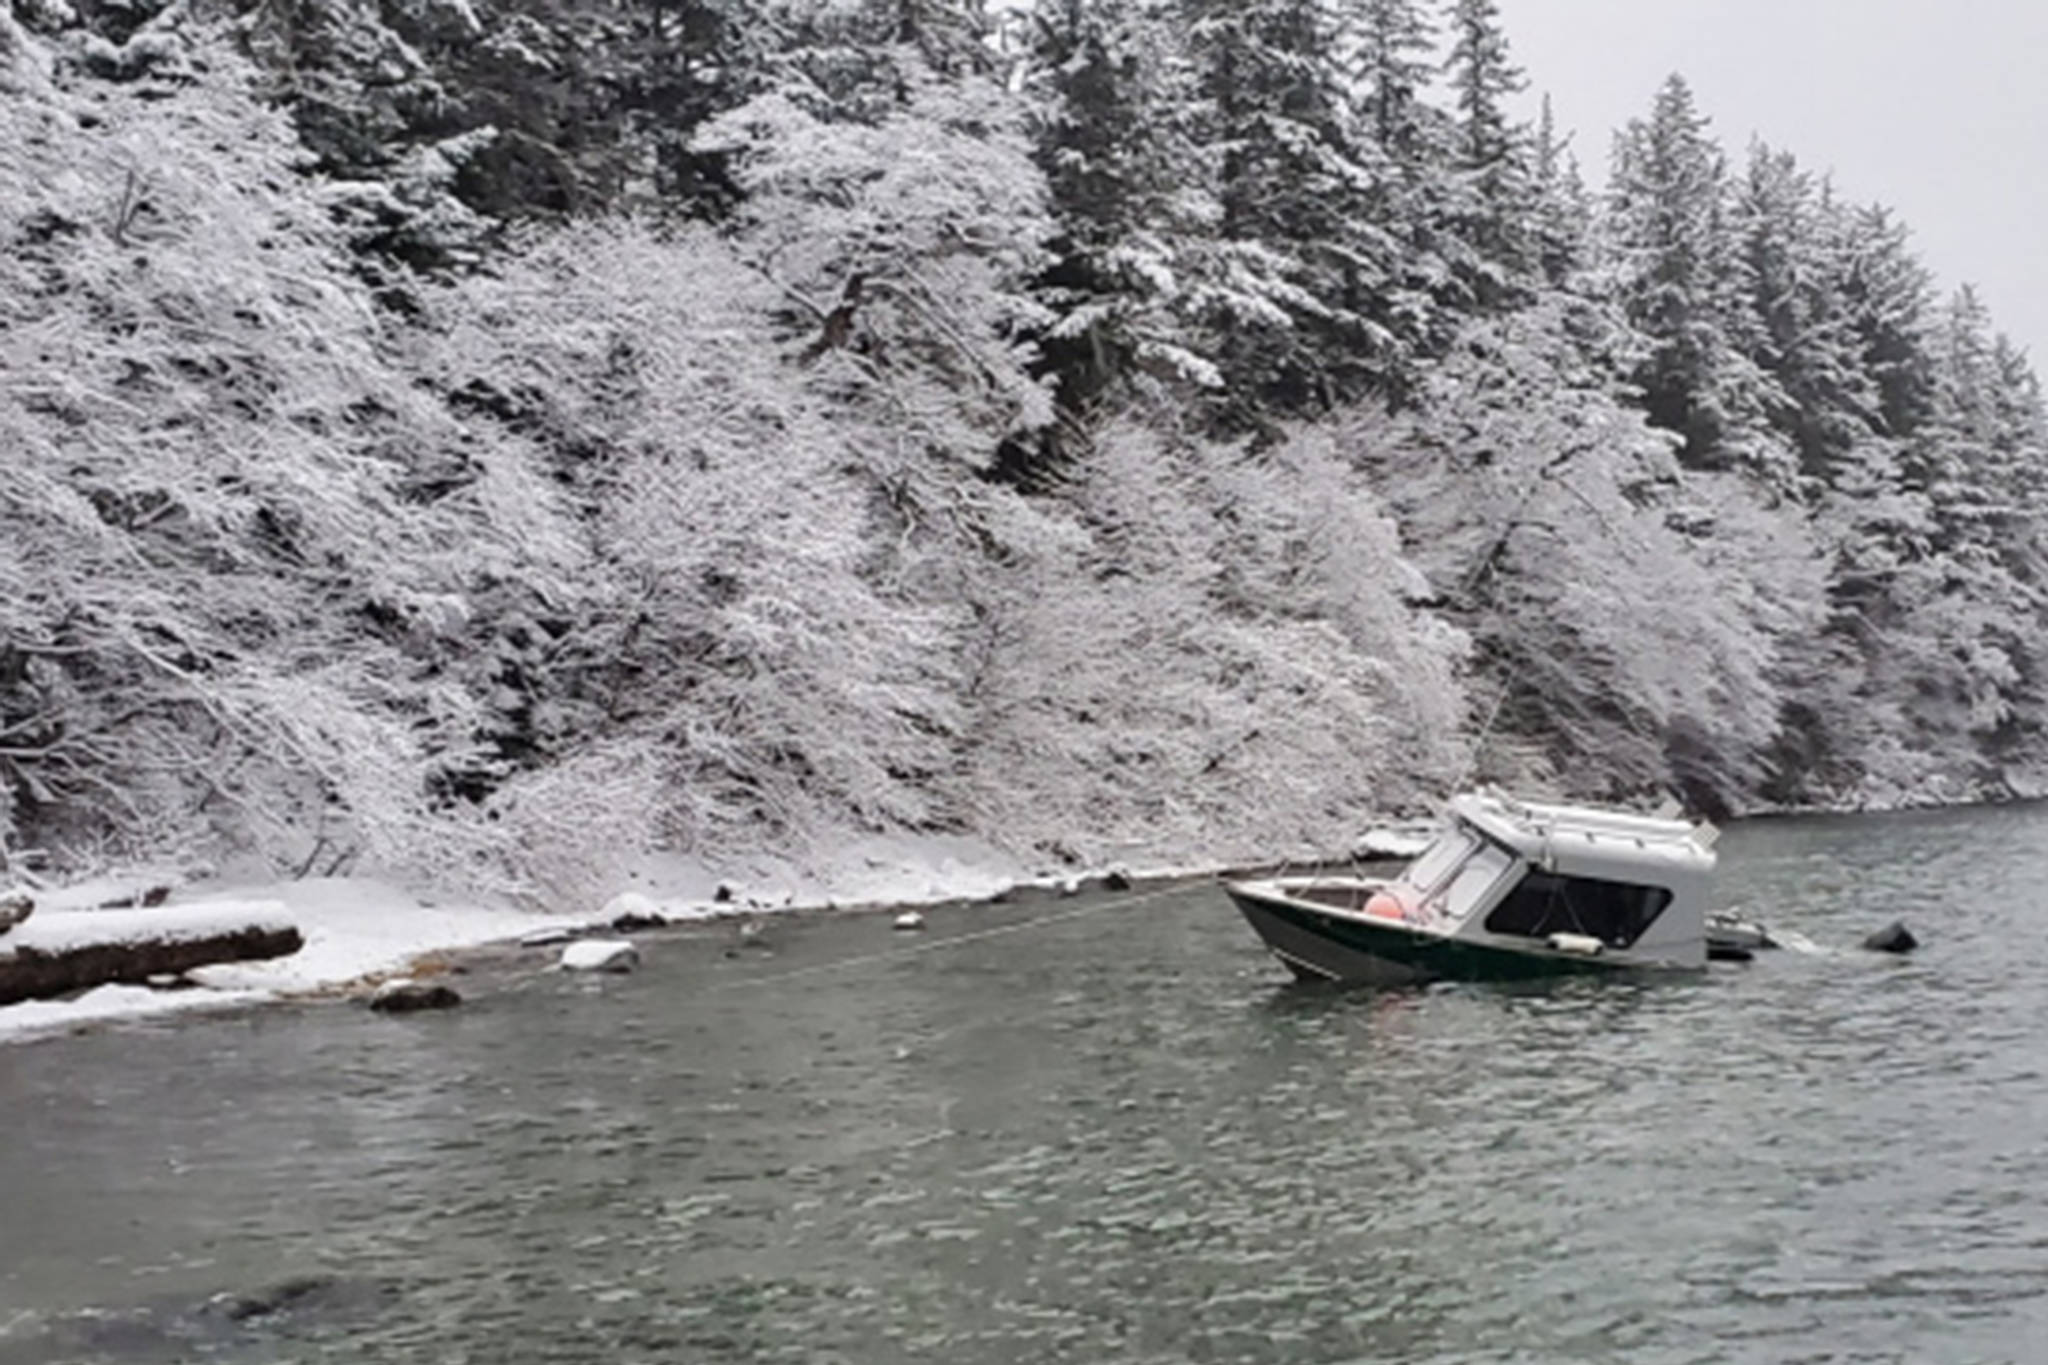 A beached vessel is anchored to the shoreline in Barlow Cove, about 15 miles northeast of Juneau, Alaska, Dec. 17, 2020. The crew of Coast Guard cutter Bailey Barco rescued three hunters who ended up stranded on shore after the vessel took on water. (Courtesy Photo / U.S. Coast Guard Cutter Bailey Barco)